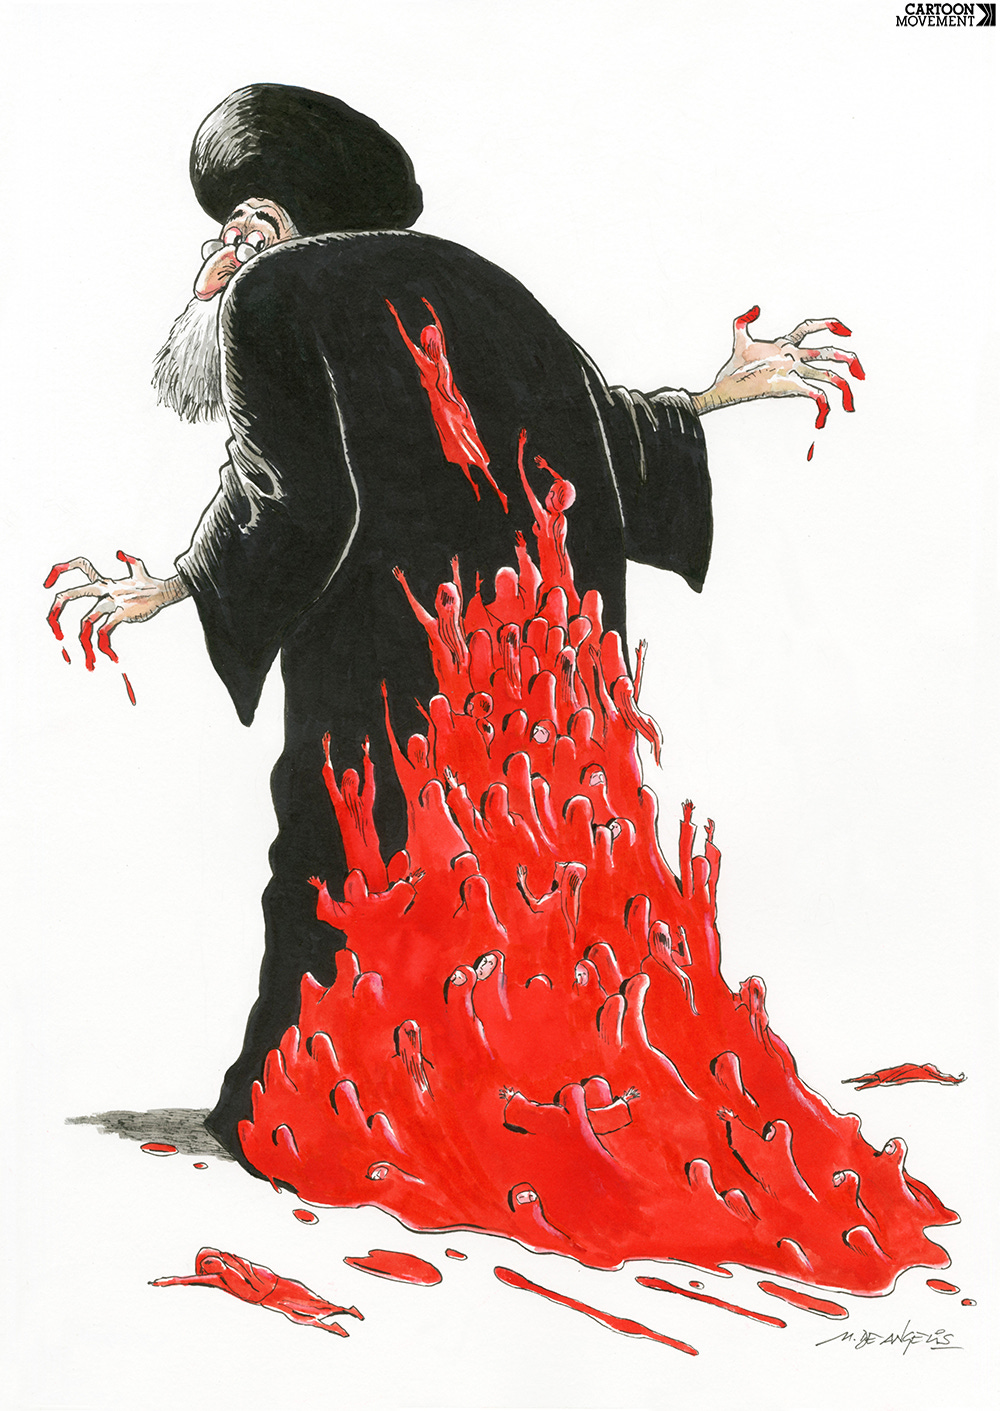 Cartoon showing Iranian leader Khamenei walking and looking back at a large bloodstain crawling up his back which is made up of the (activist) women that died under his rule